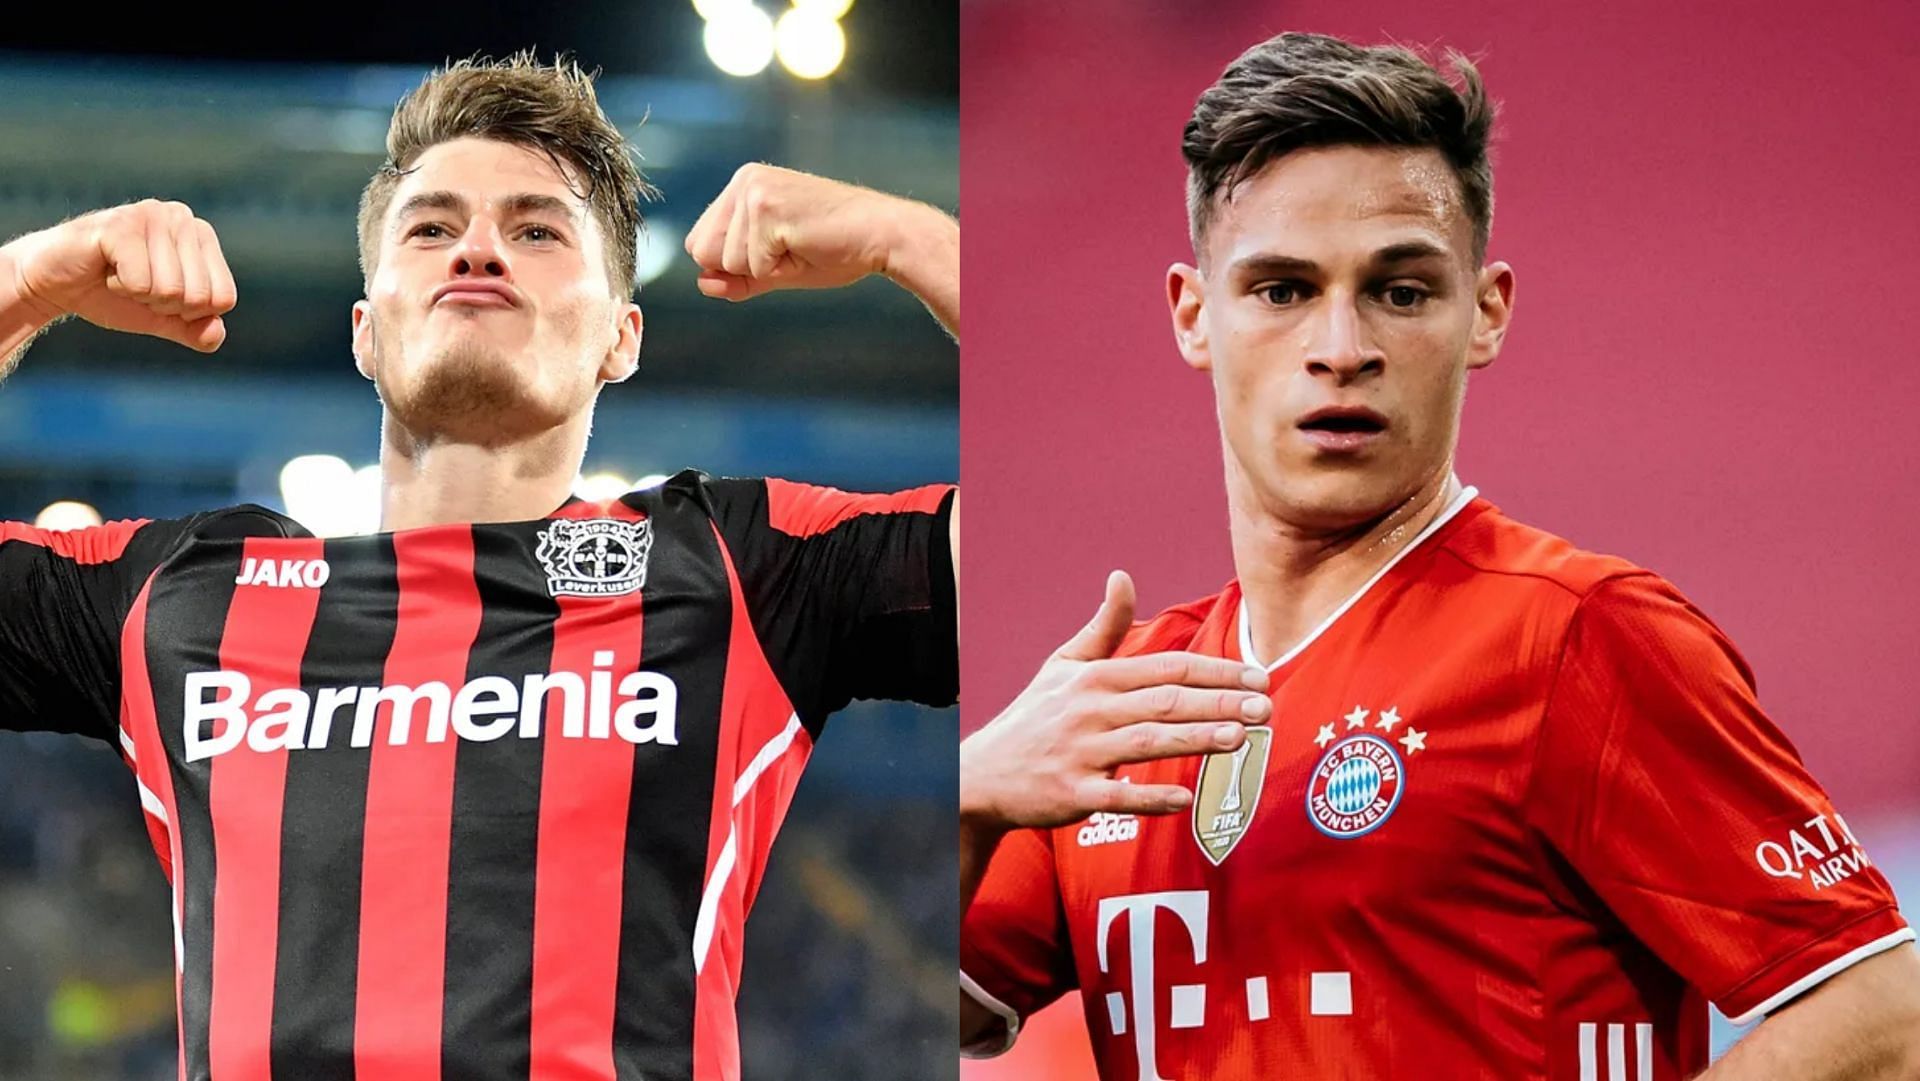 Fans are unhappy about the ratings of stars like Schick and Kimmch (Images via Bundesliga)